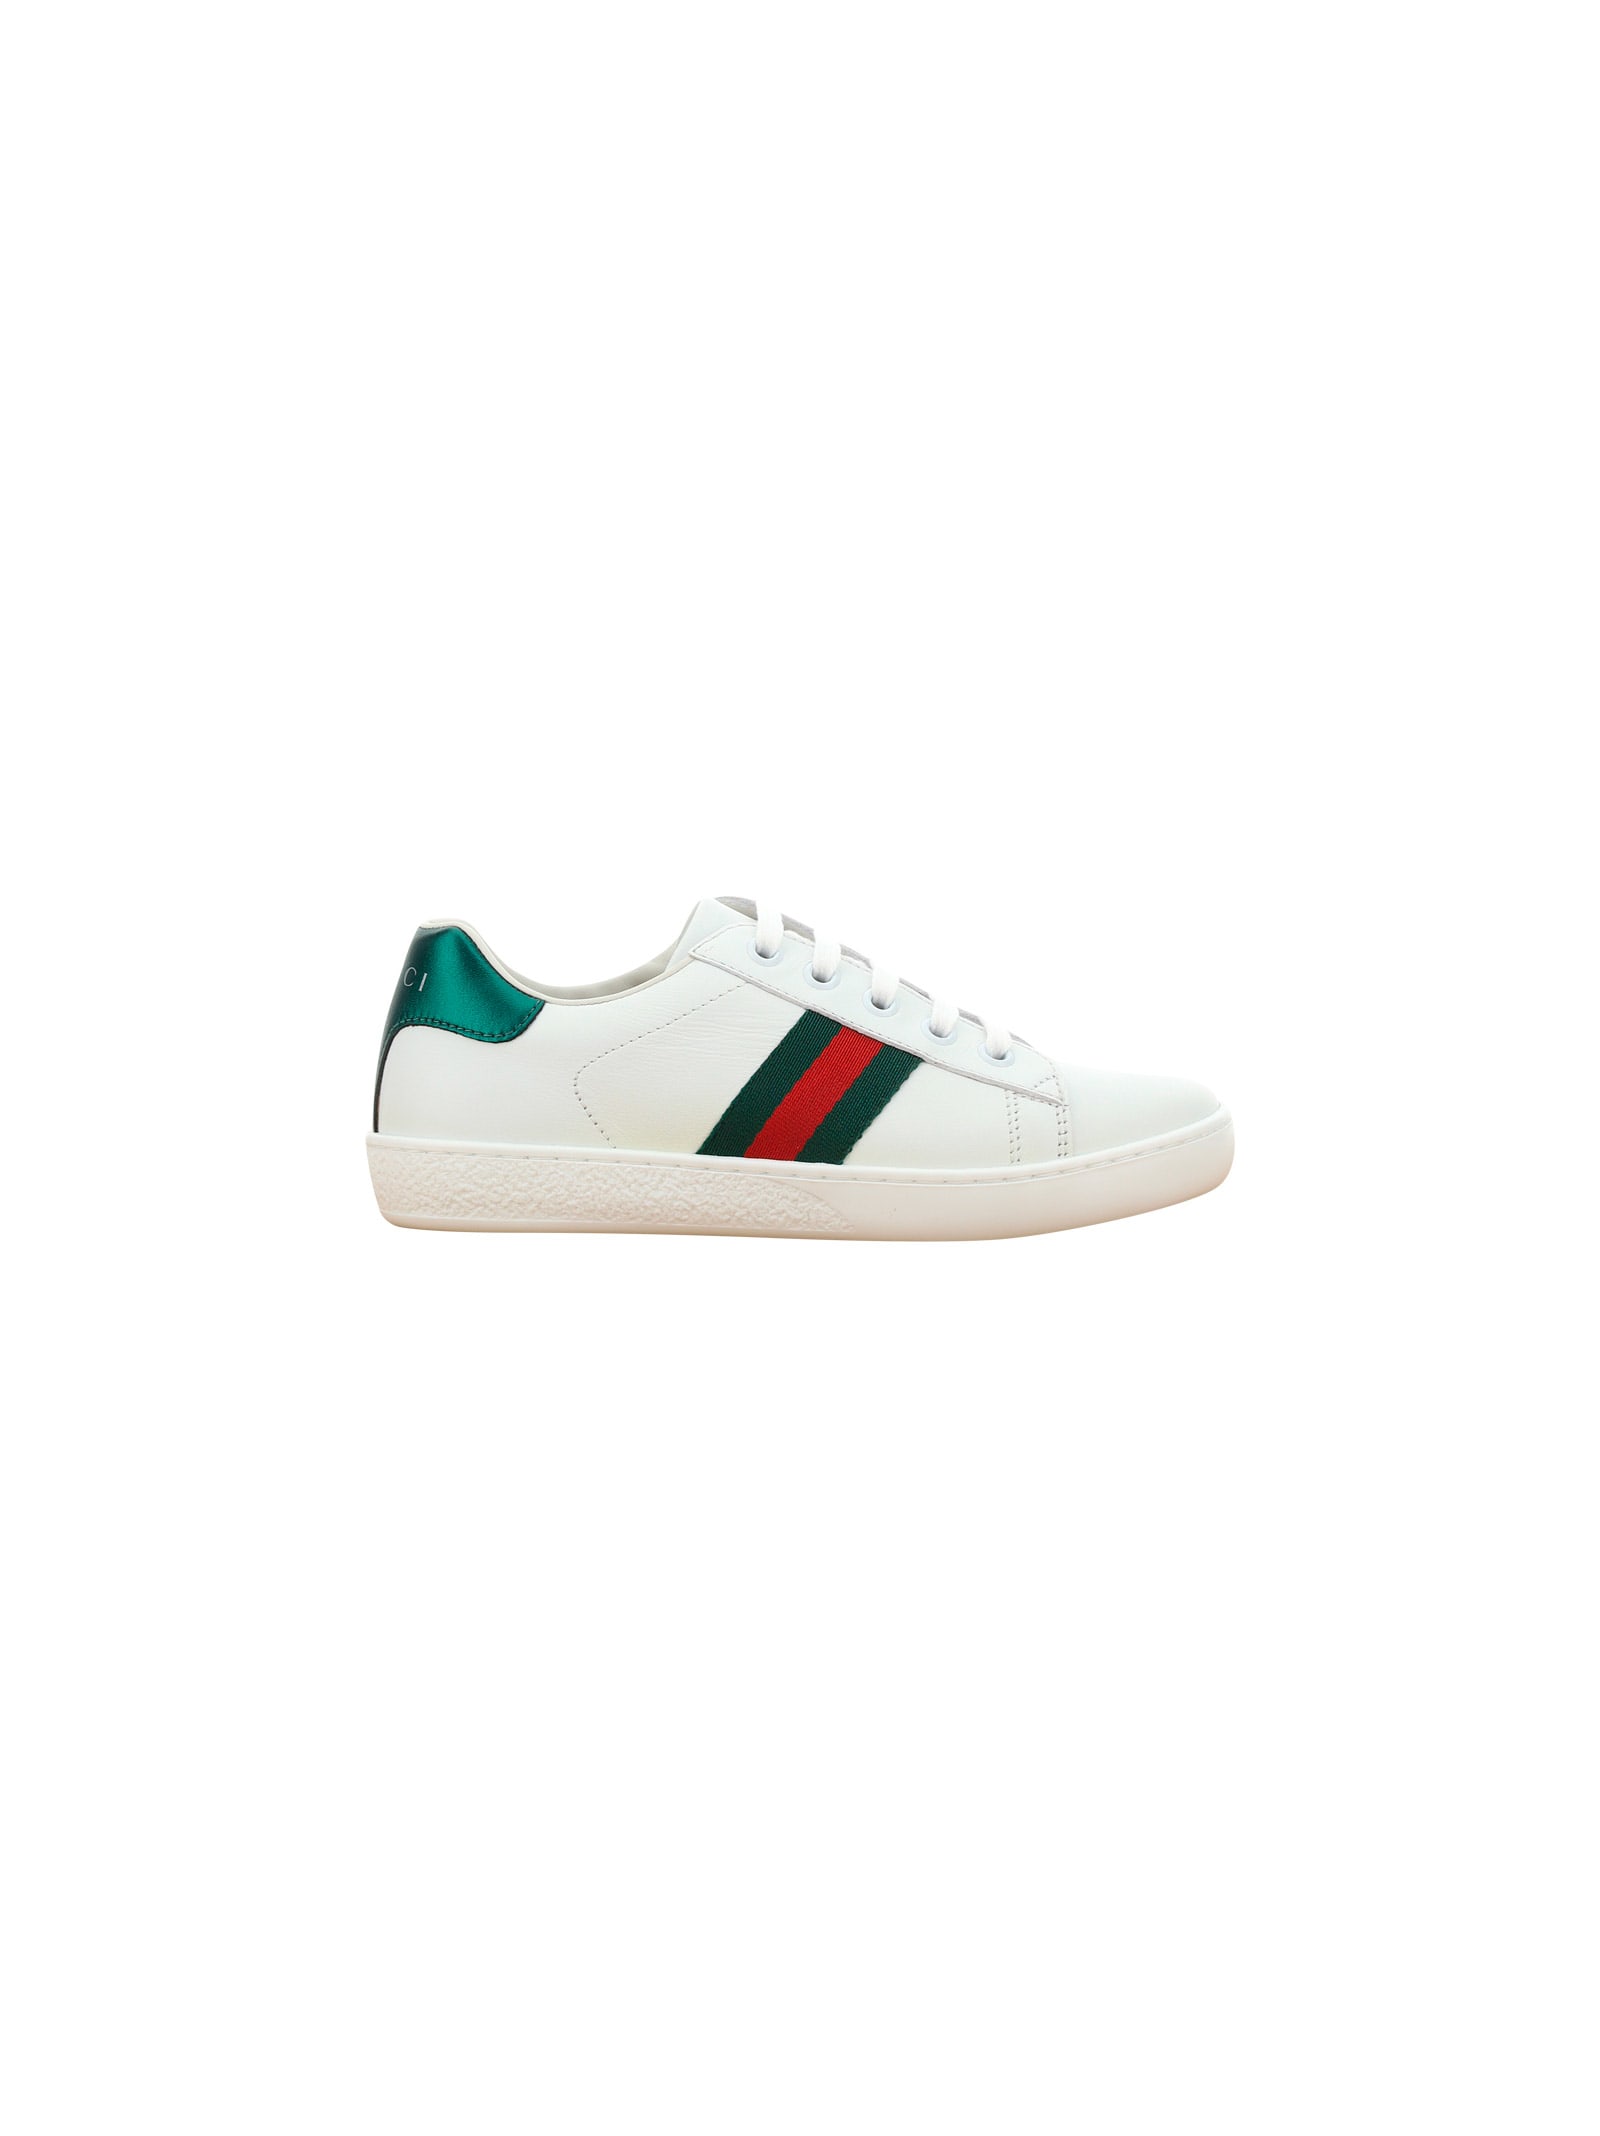 Gucci Ace Sneakers For Boy